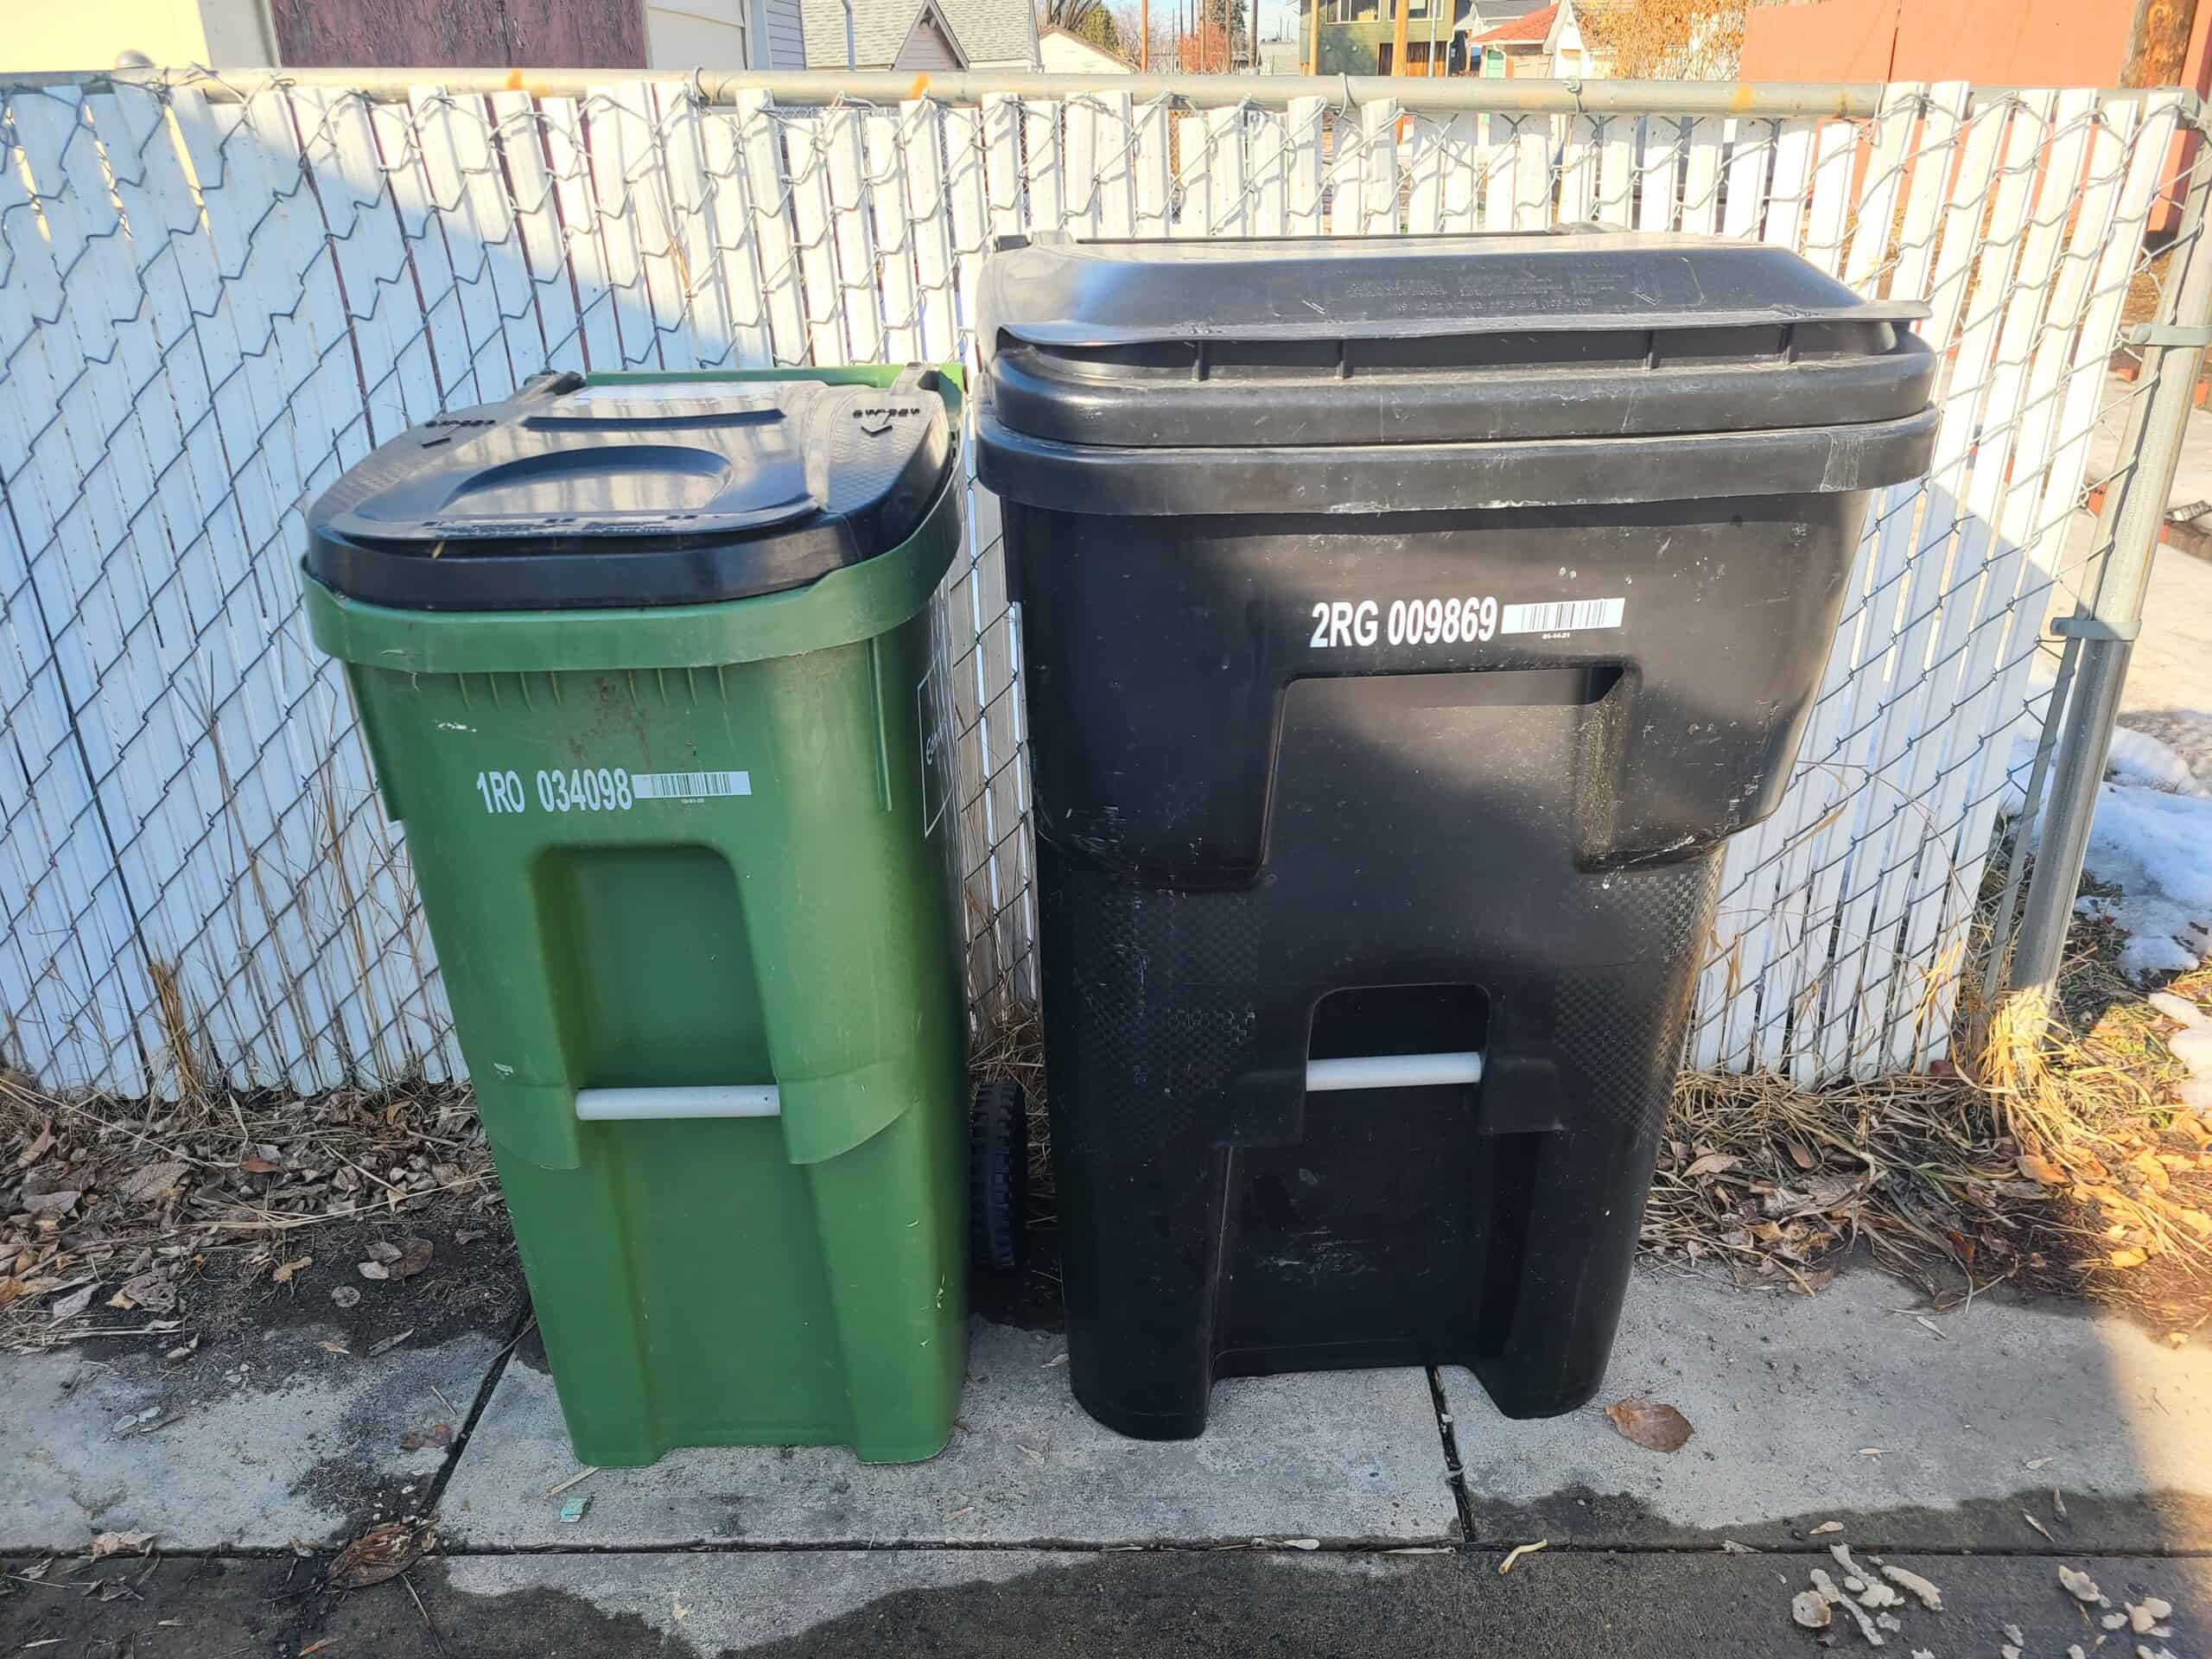 Waste collection changes coming